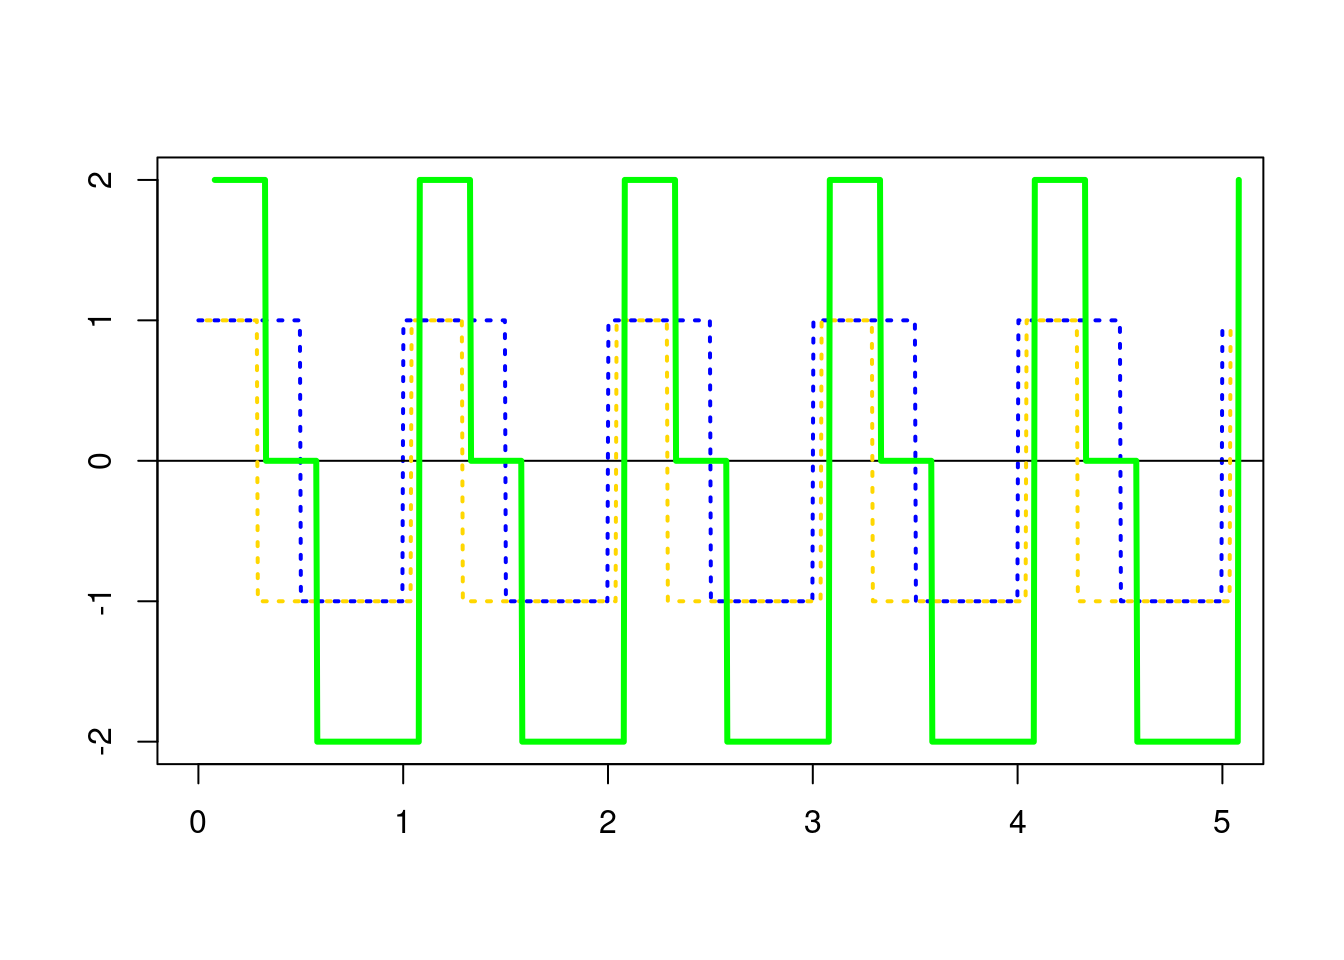 Interference of a pulse wave with 25% duty cycle (gold) with a pulse wave with a 50% duty cycle (blue). Note the resulting wave (green) has a positive signal matching the 25% wave and a negative signal matching the 50% wave. Waves are offset for comparison.